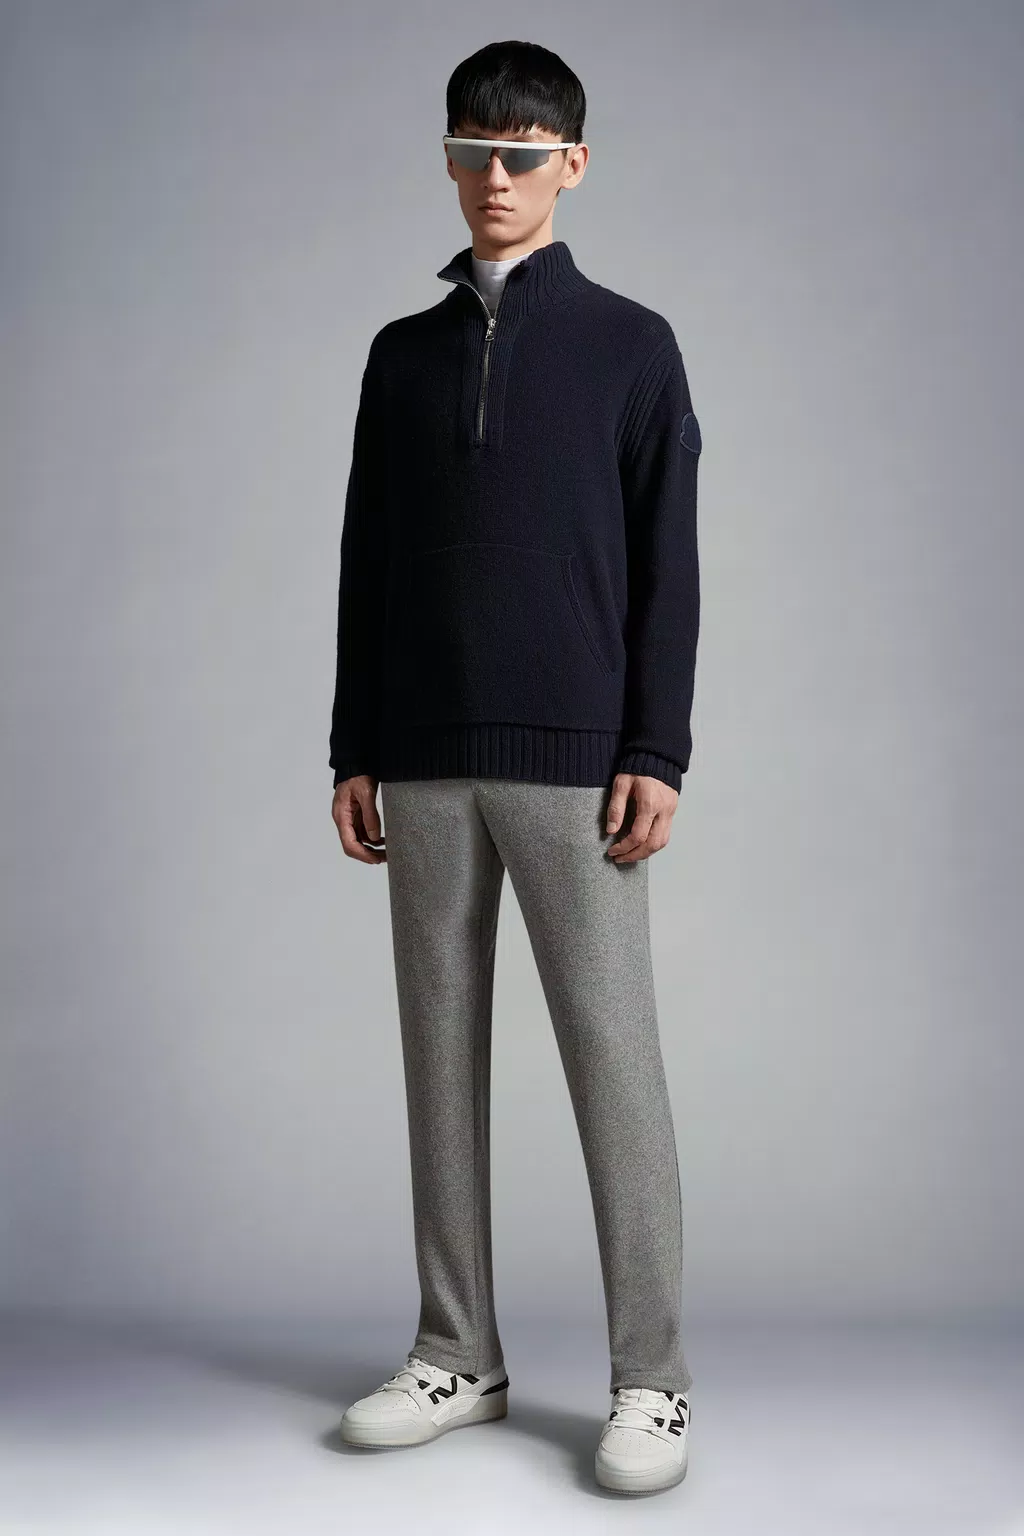 Embroidered Wool Mid-Layer - Men - Ready-to-Wear